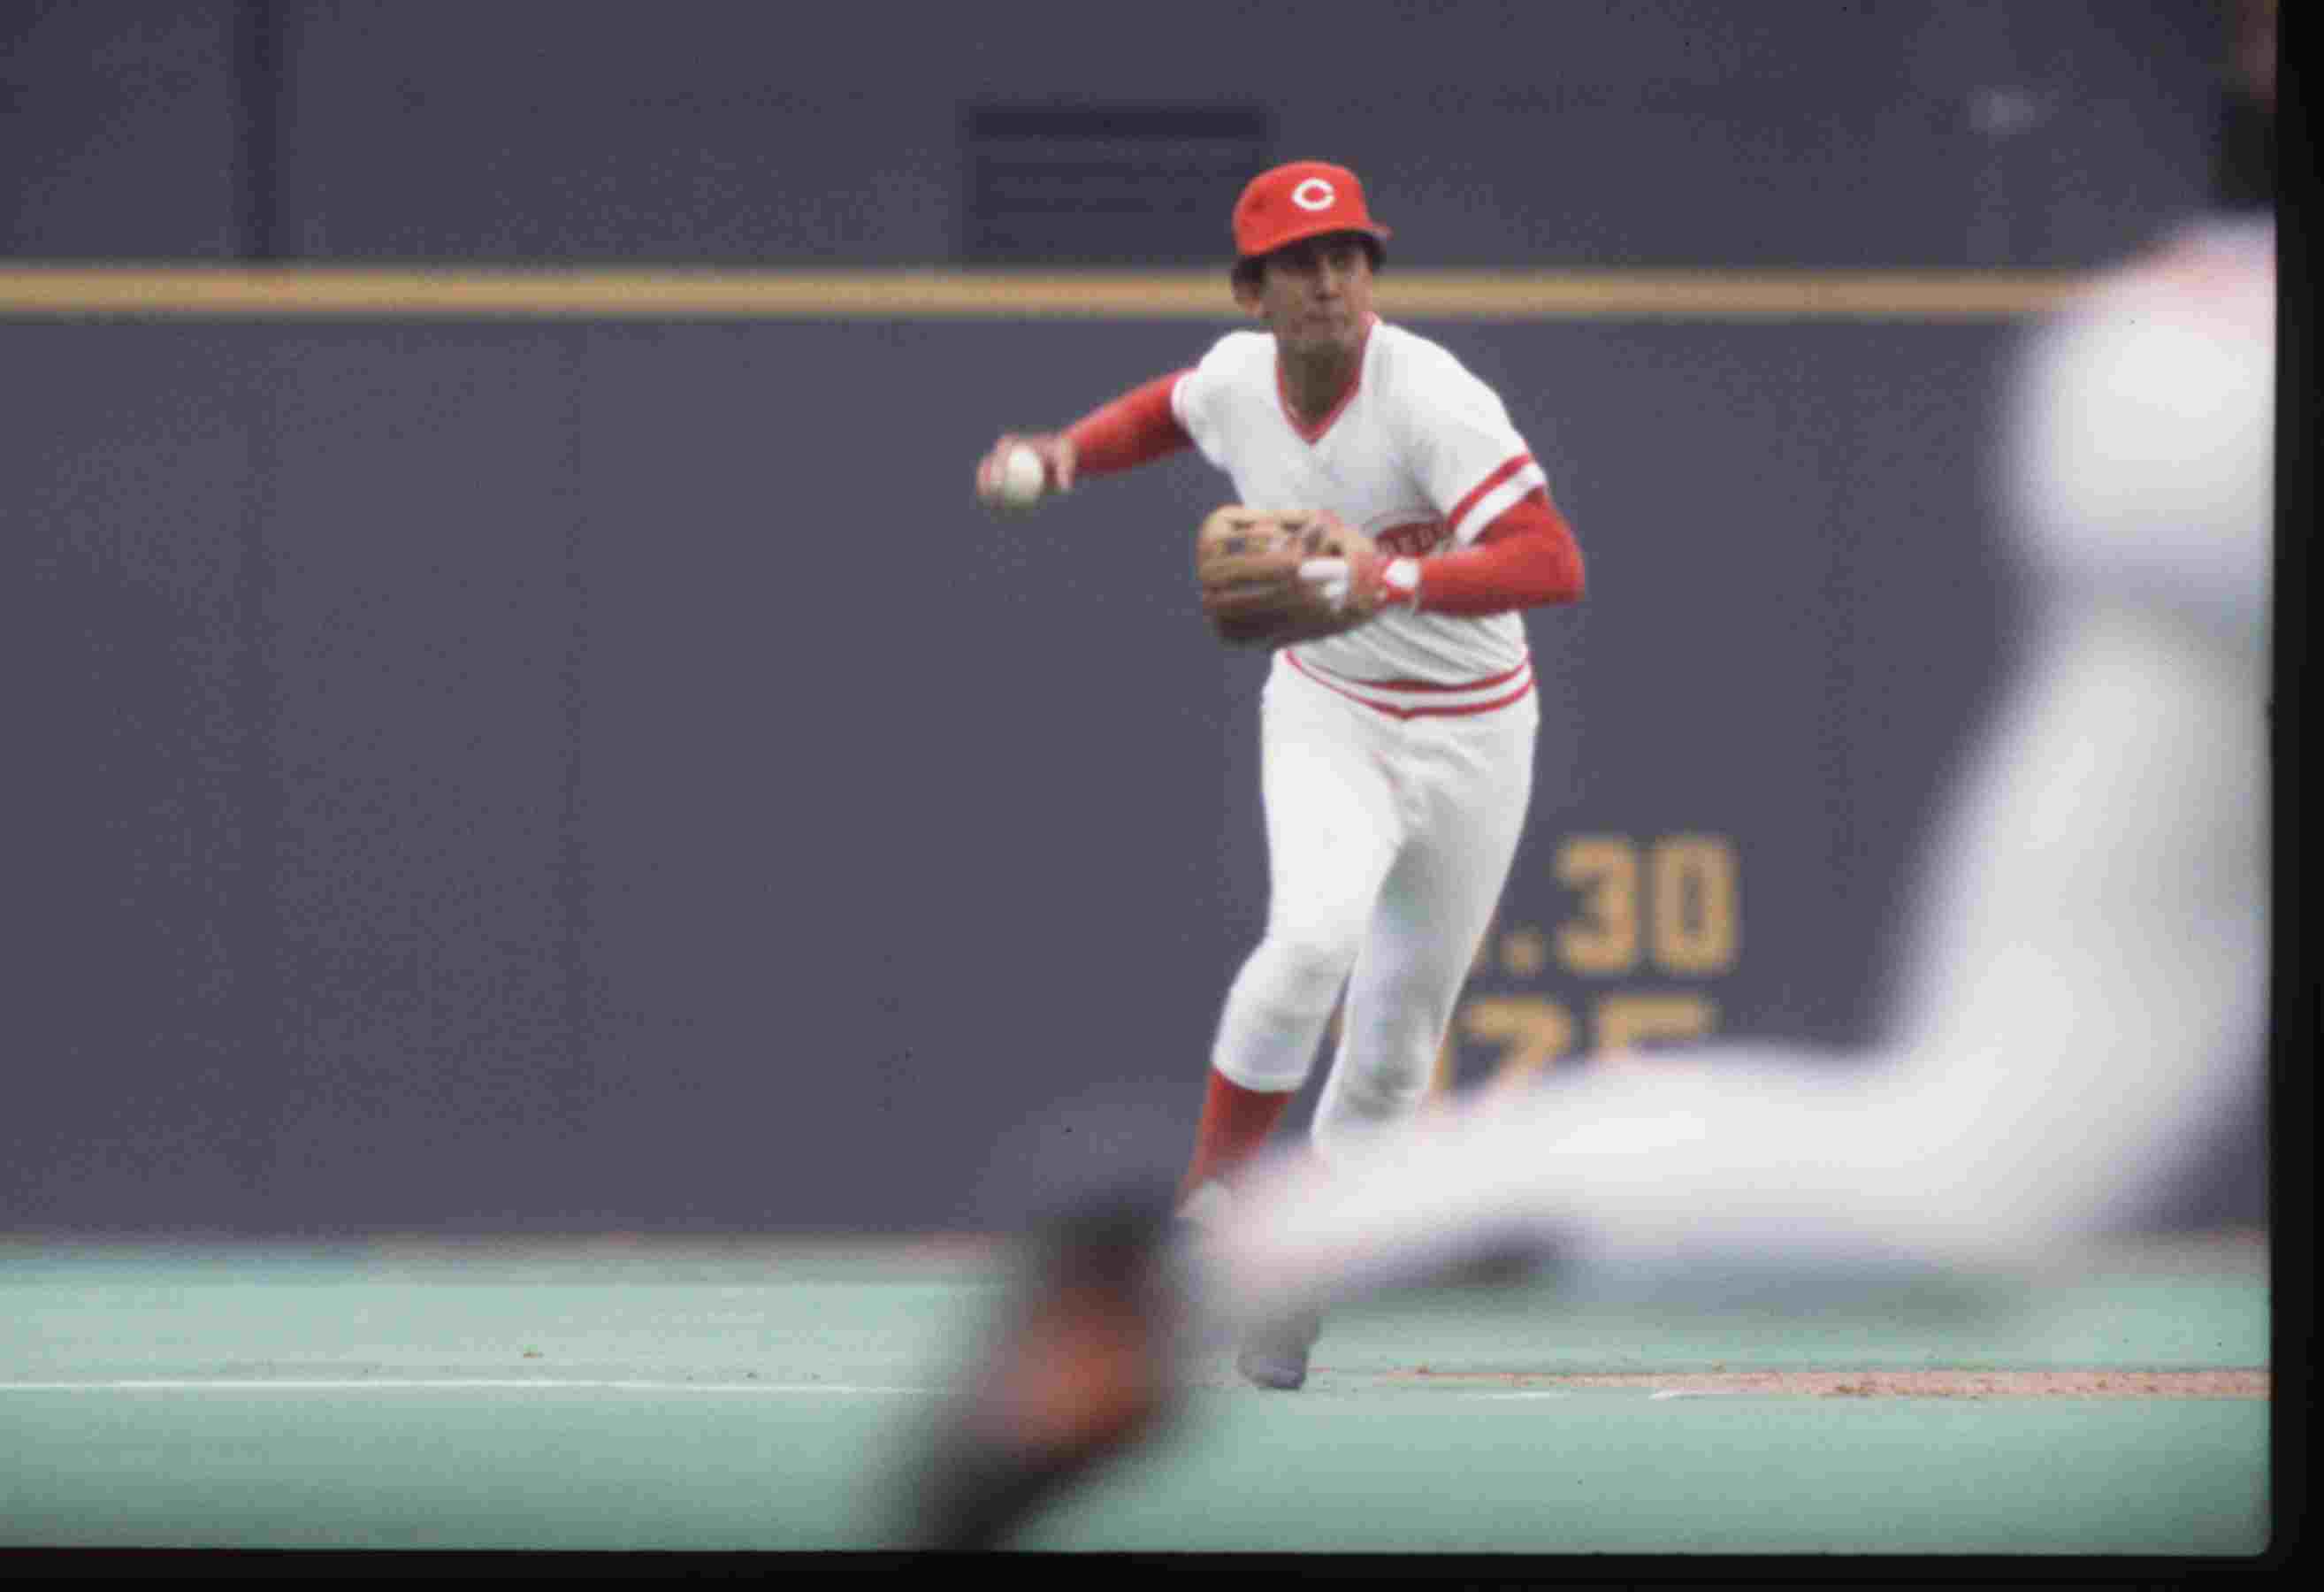 Should Davey Concepcion be in the Baseball Hall of Fame?